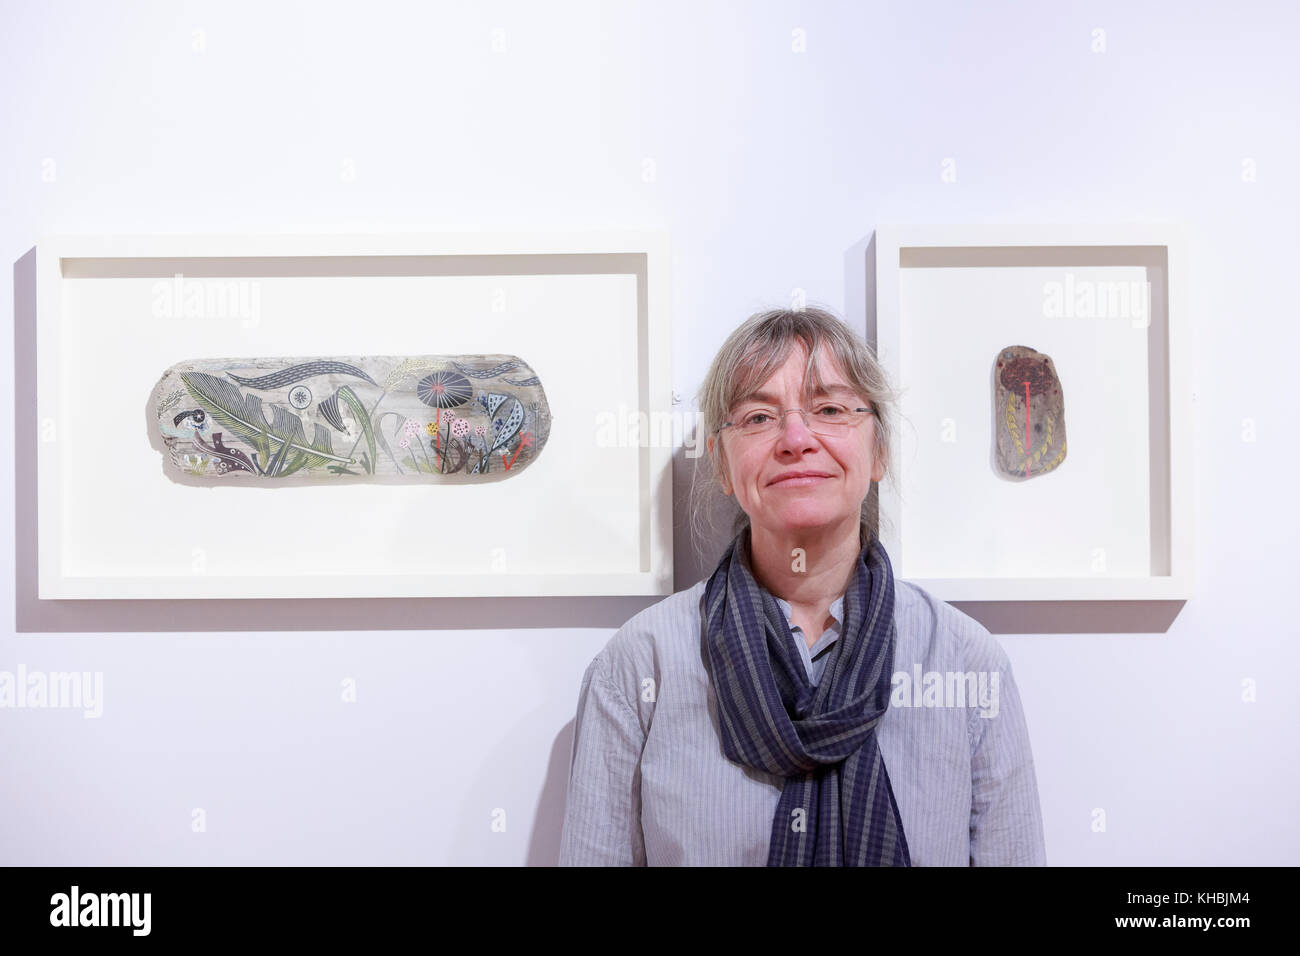 Edinburgh, Scotland. 16th November 2017. A group exhibition exploring the fine line between art and craft in two and three dimensions opens at the City Art Centre on Saturday 18 November 2017 Pictured Angie Lewin. Pako Mera/Alamy Live News Stock Photo